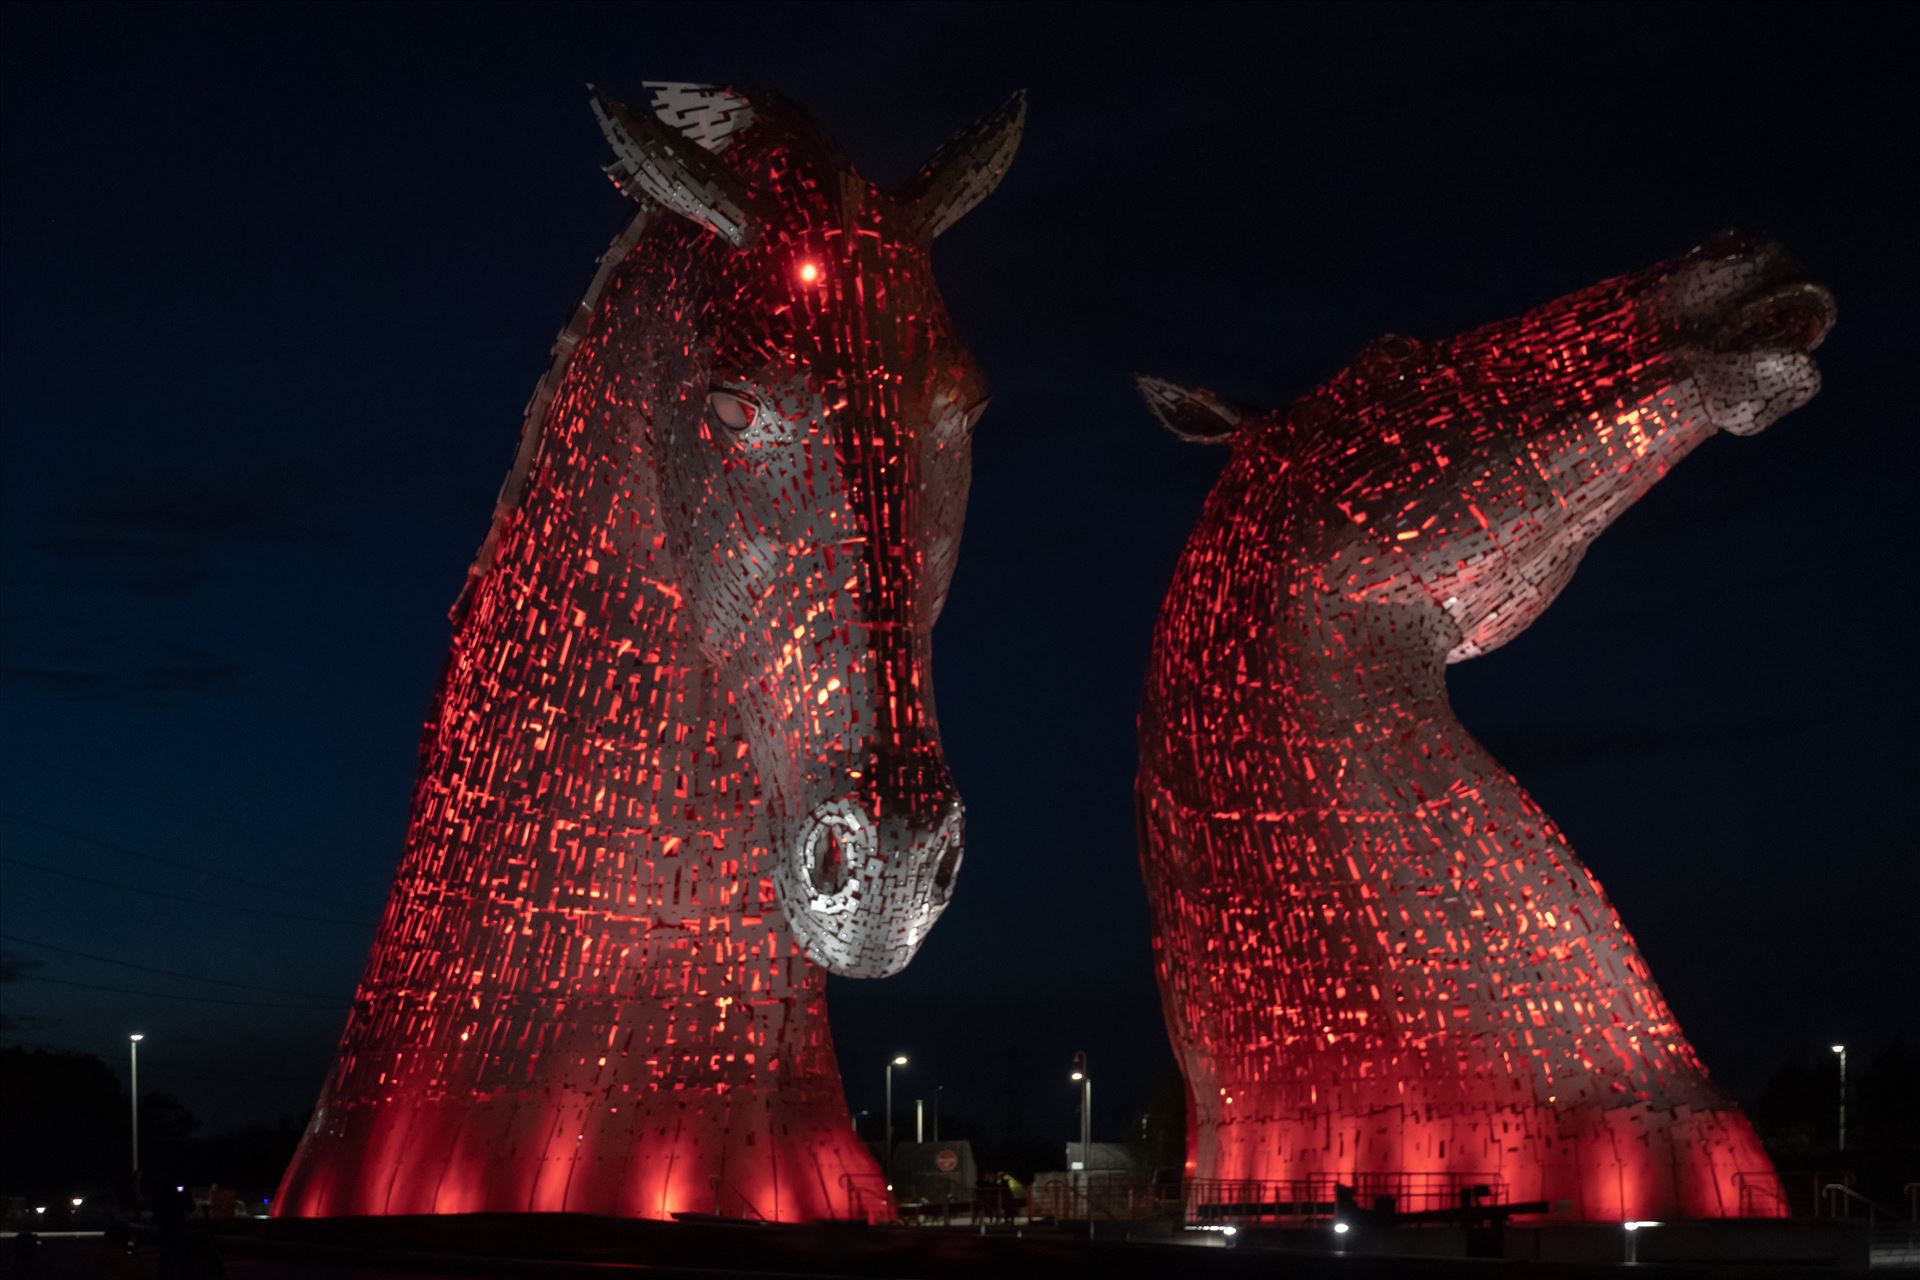 The Kelpies, Falkirk, Scotland - Red Built of structural steel with a stainless steel cladding, The Kelpies are 30 metres high and weigh 300 tonnes each. Construction began in June 2013 by Graham Dobson Photography